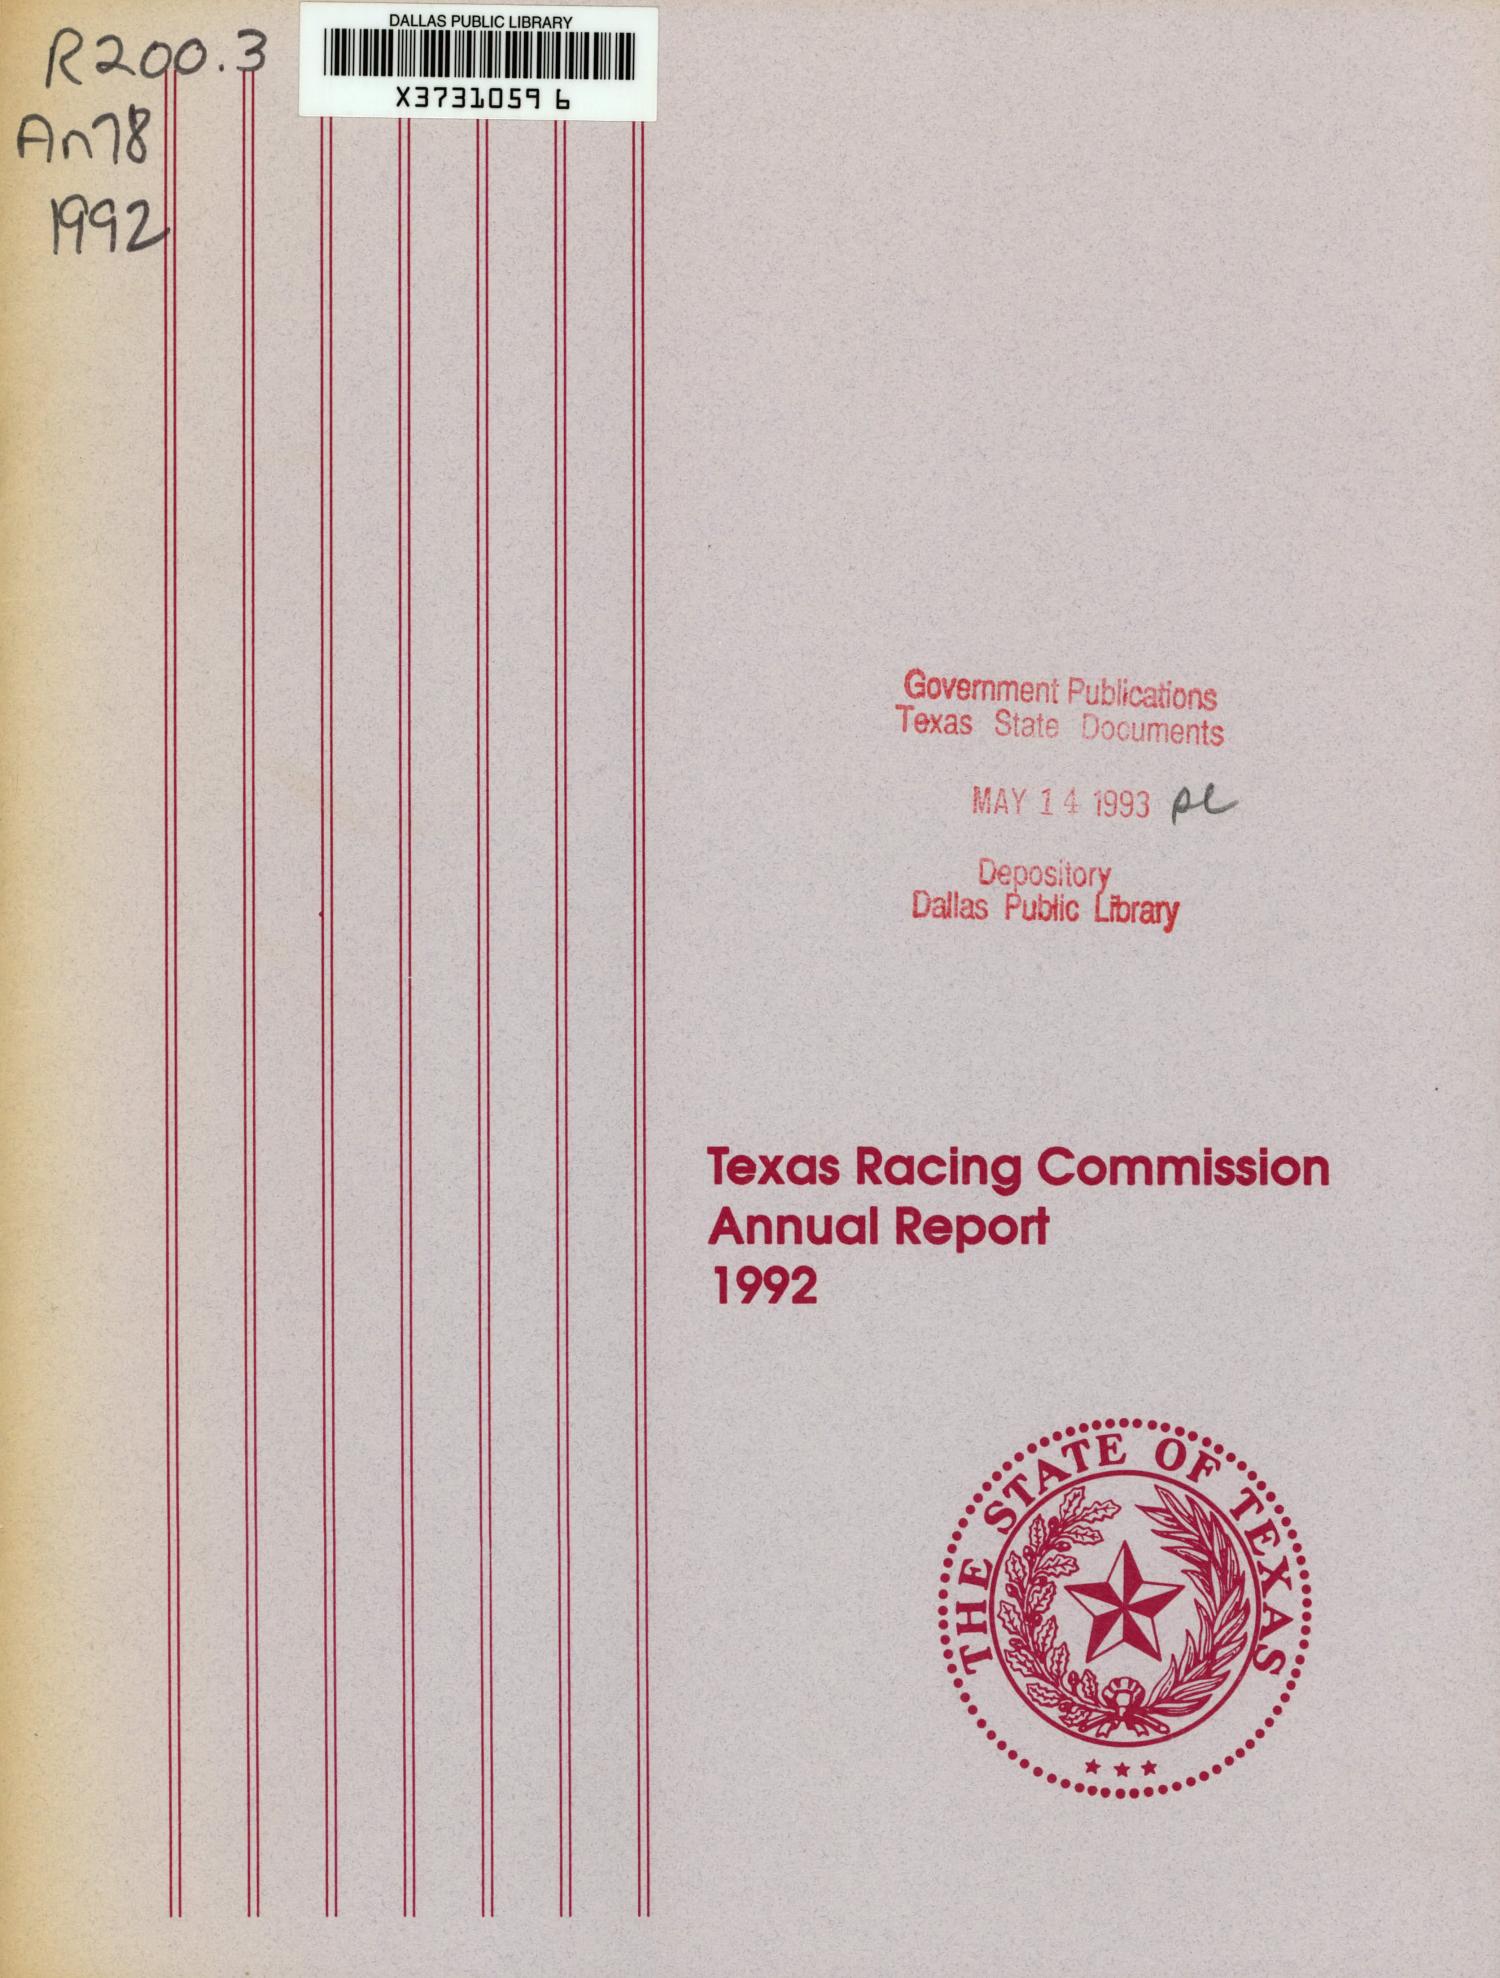 Texas Racing Commission Annual Report: 1992
                                                
                                                    FRONT COVER
                                                